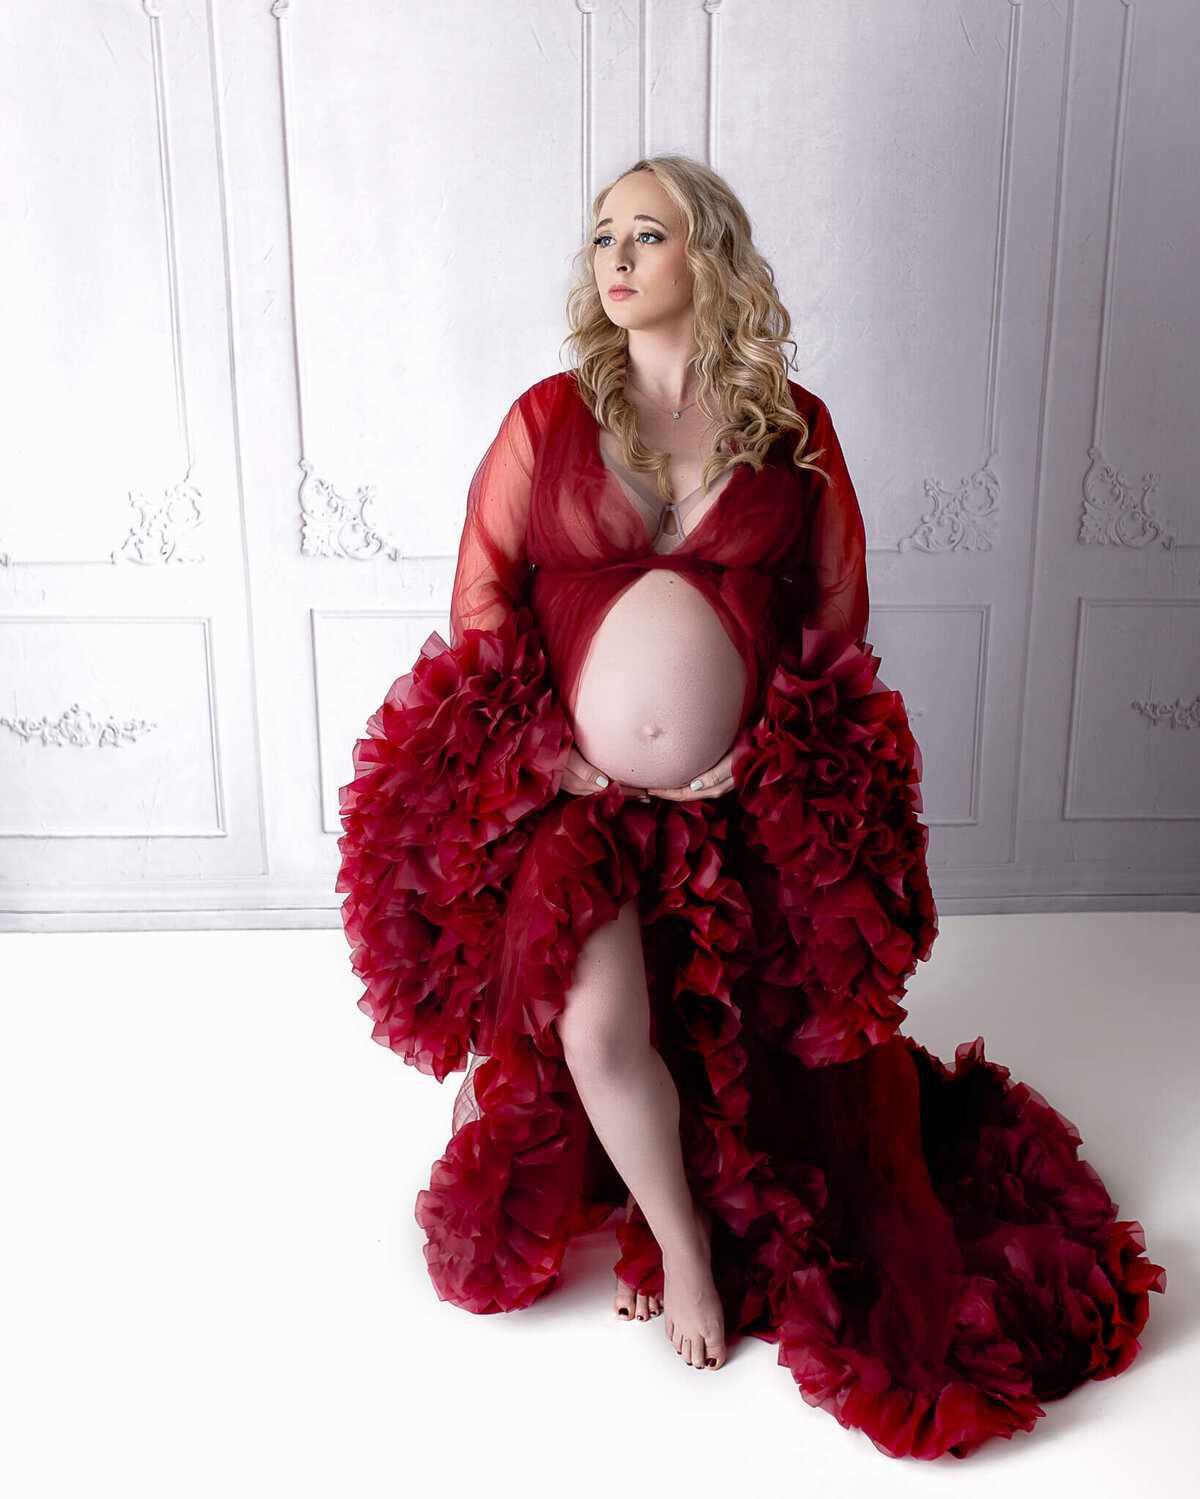 Deep red dress in studio akron canton maternity session.